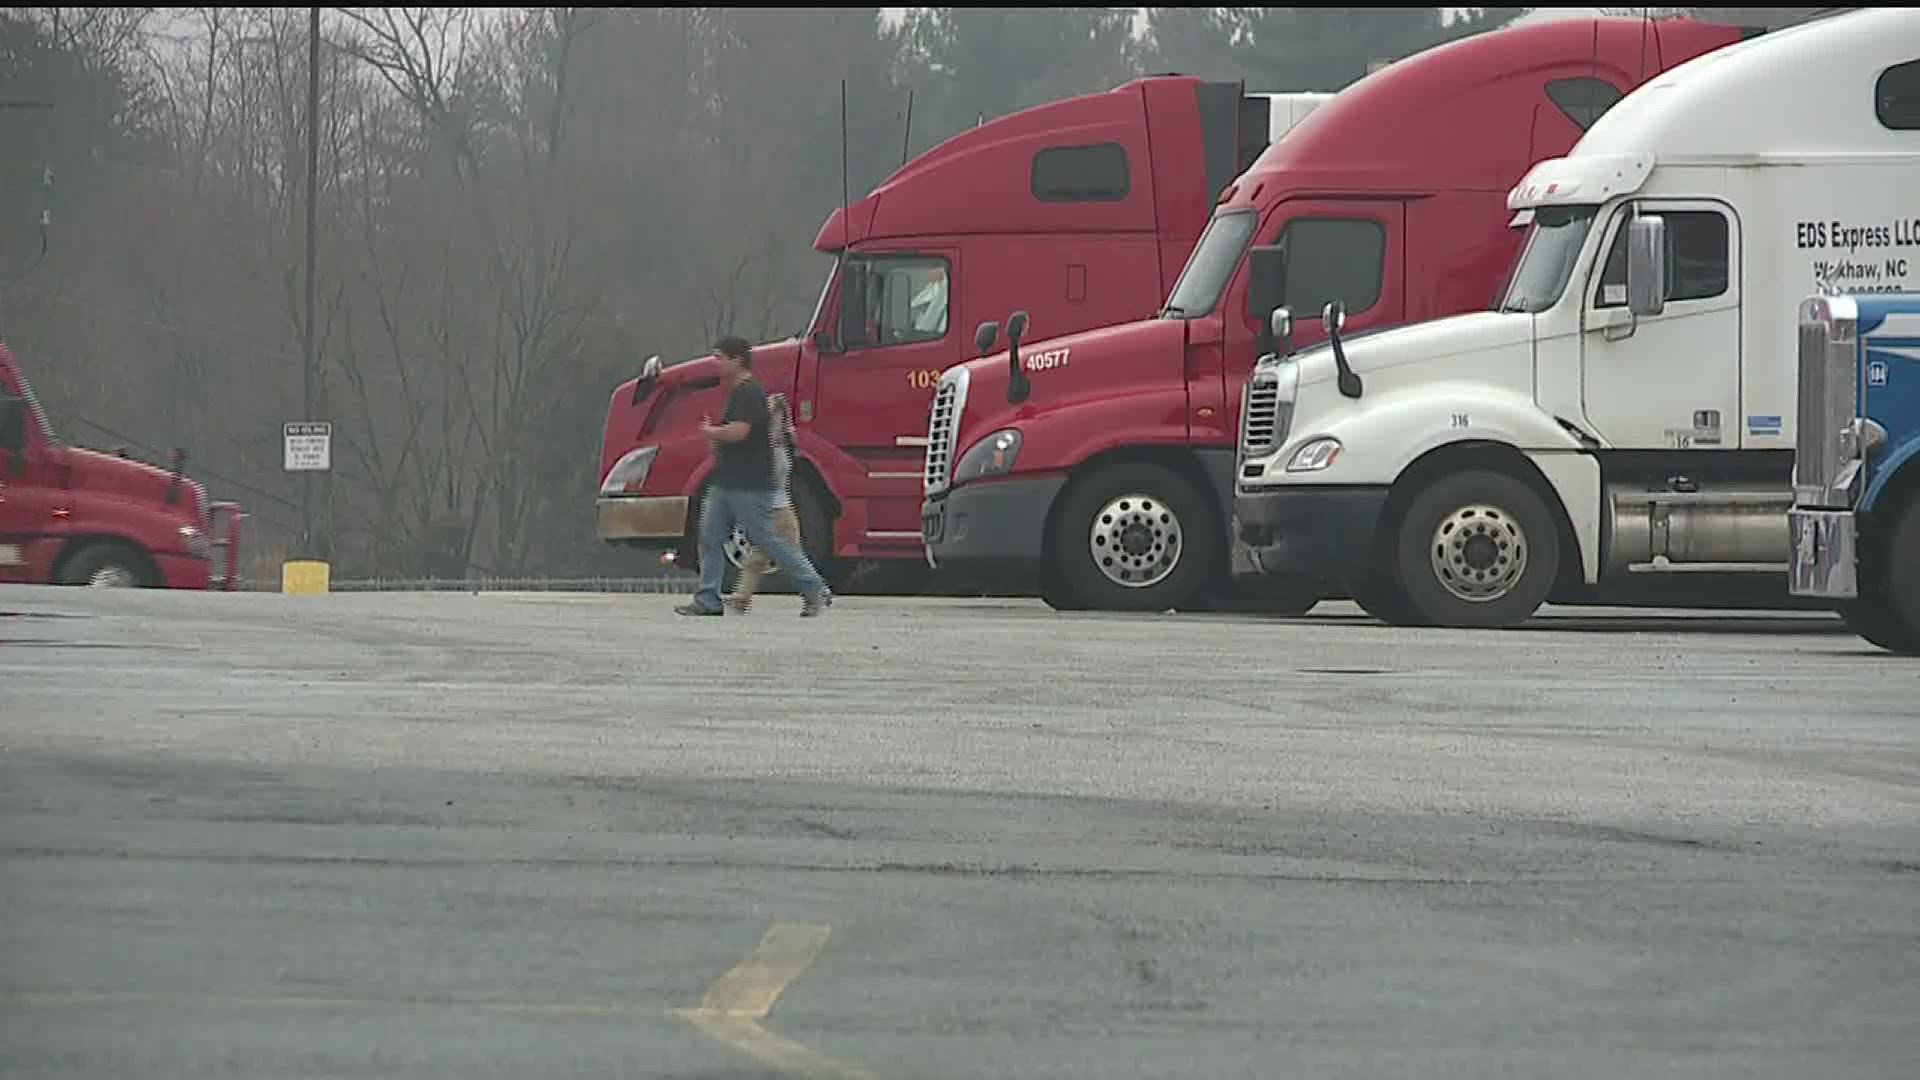 Turnpike to reopen service plazas, PennDOT opens rest areas to assist truckers